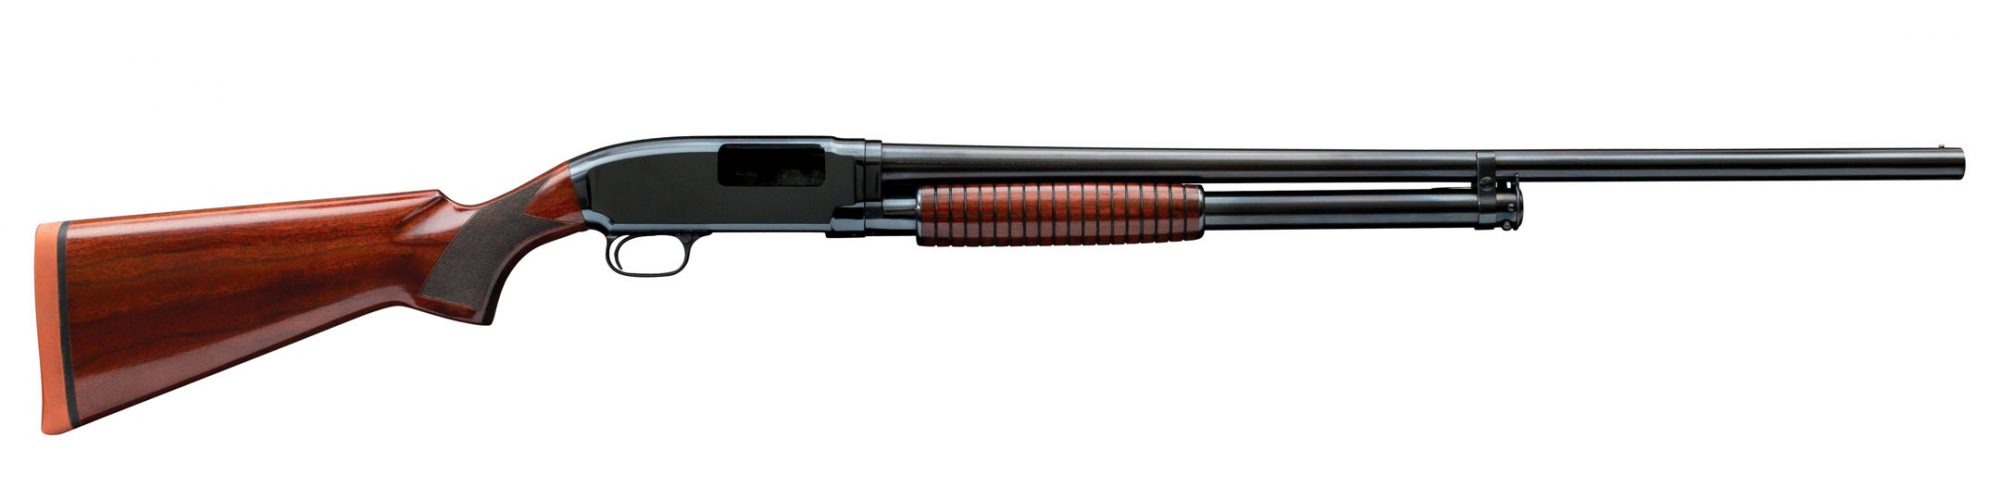 Winchester Model 12 pump-action 12 gauge shotgun from 1927, restored in 2023 by Turnbull Restoration of Bloomfield, NY